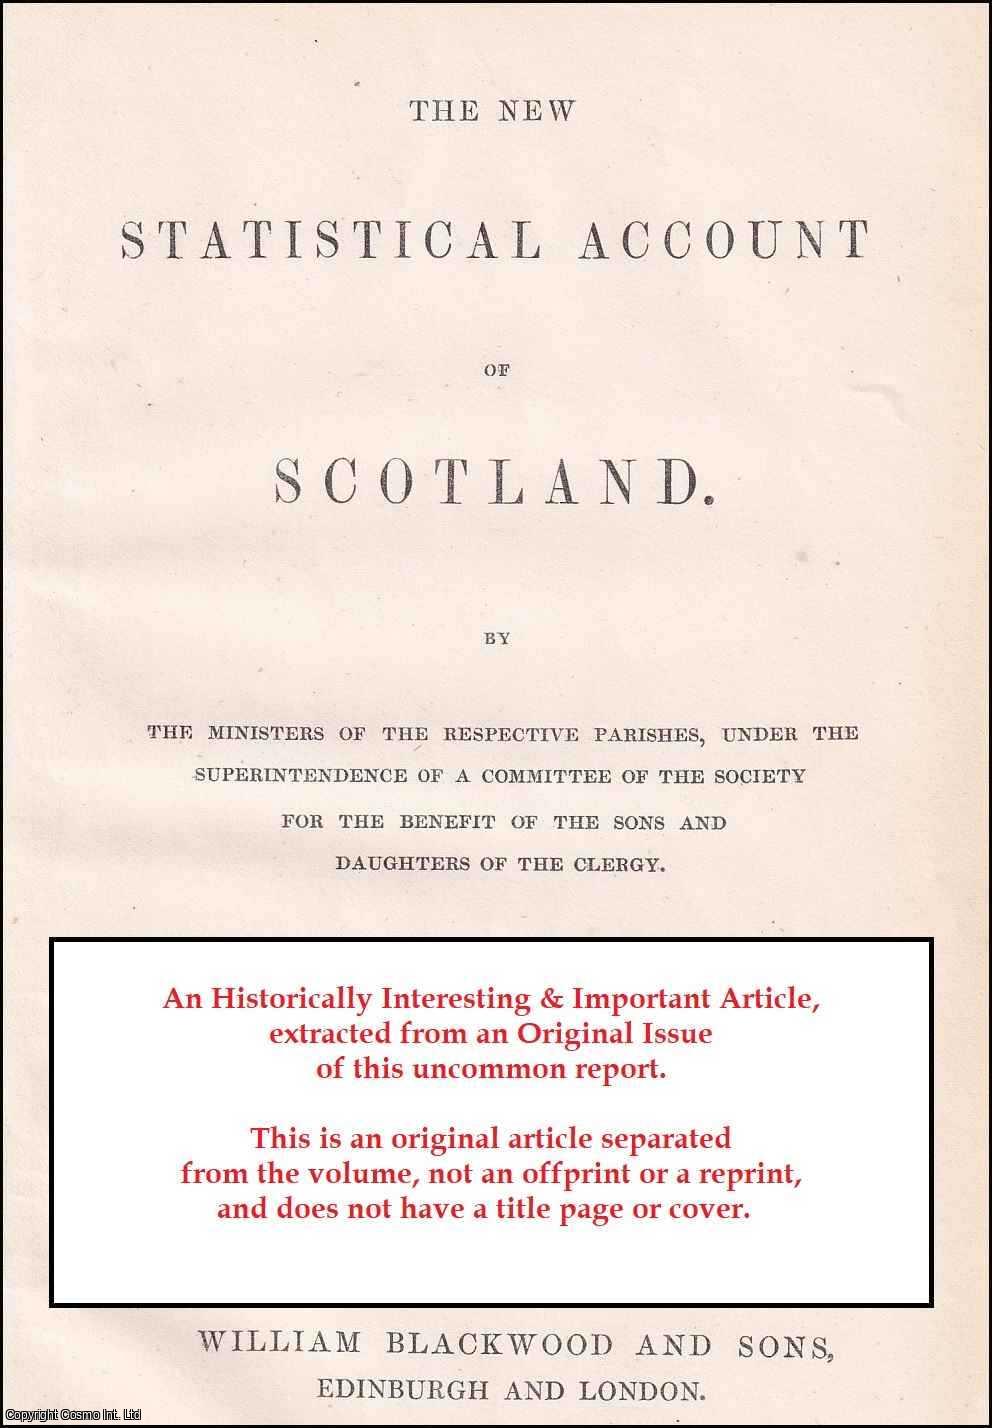 Rev. Peter Buchanan - United Parishes of Stitchell and Hume. Presbytery of Kelso, Synod of Merse and Tiviotdale. An uncommon original article from The New Statistical Account of Scotland, 1845.